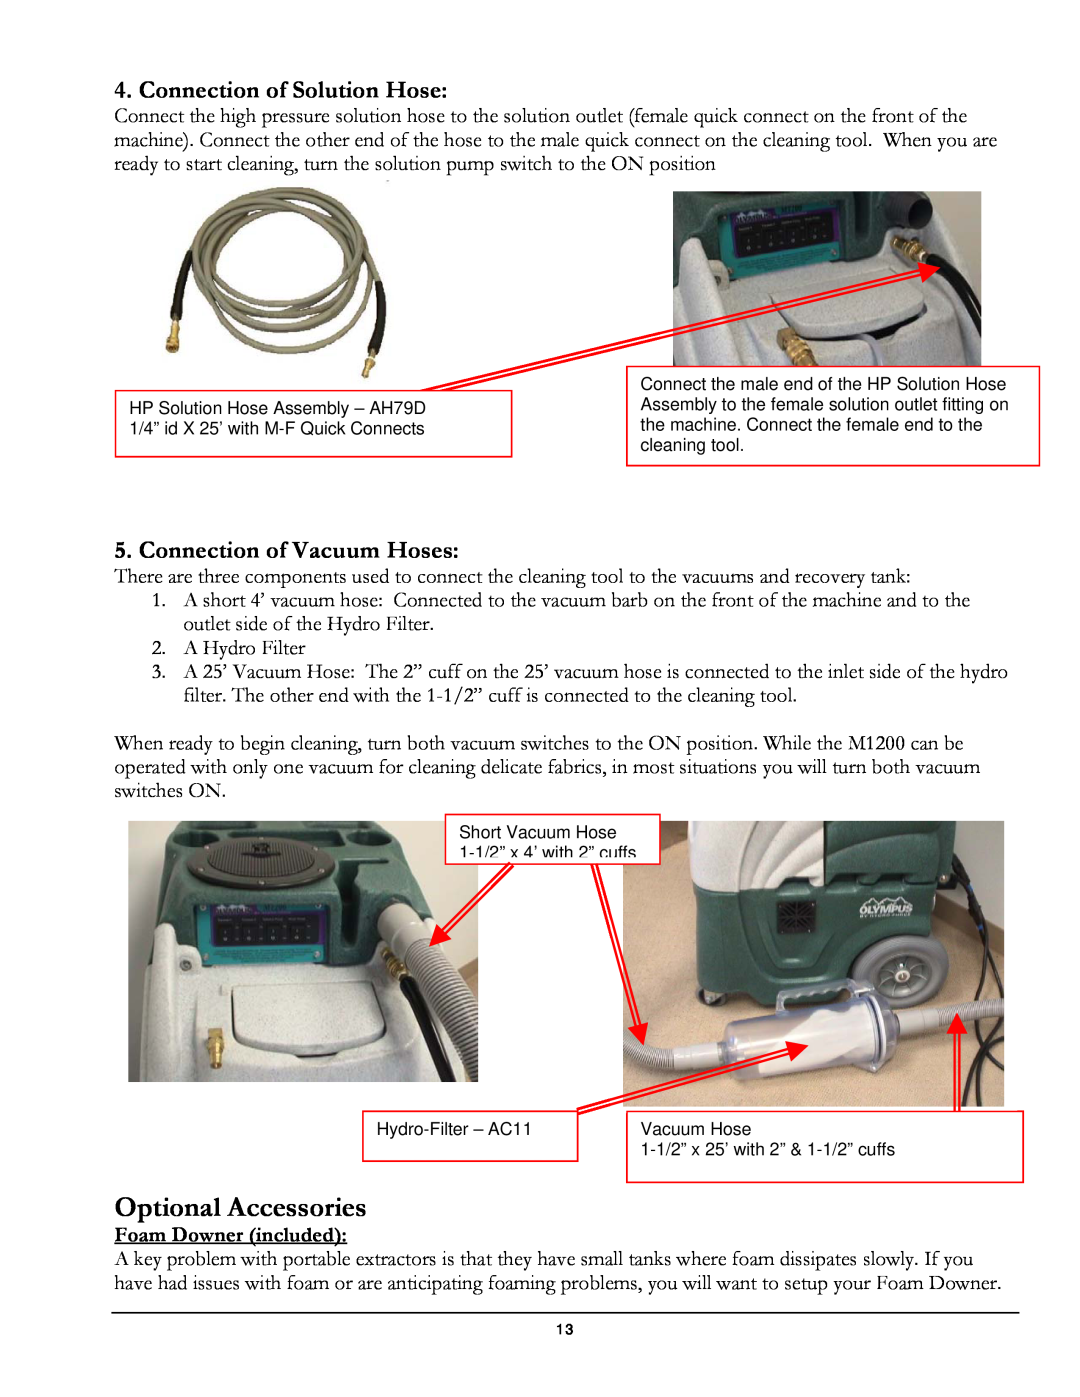 Olympus M1200 manual Optional Accessories, Connection of Solution Hose, Connection of Vacuum Hoses 